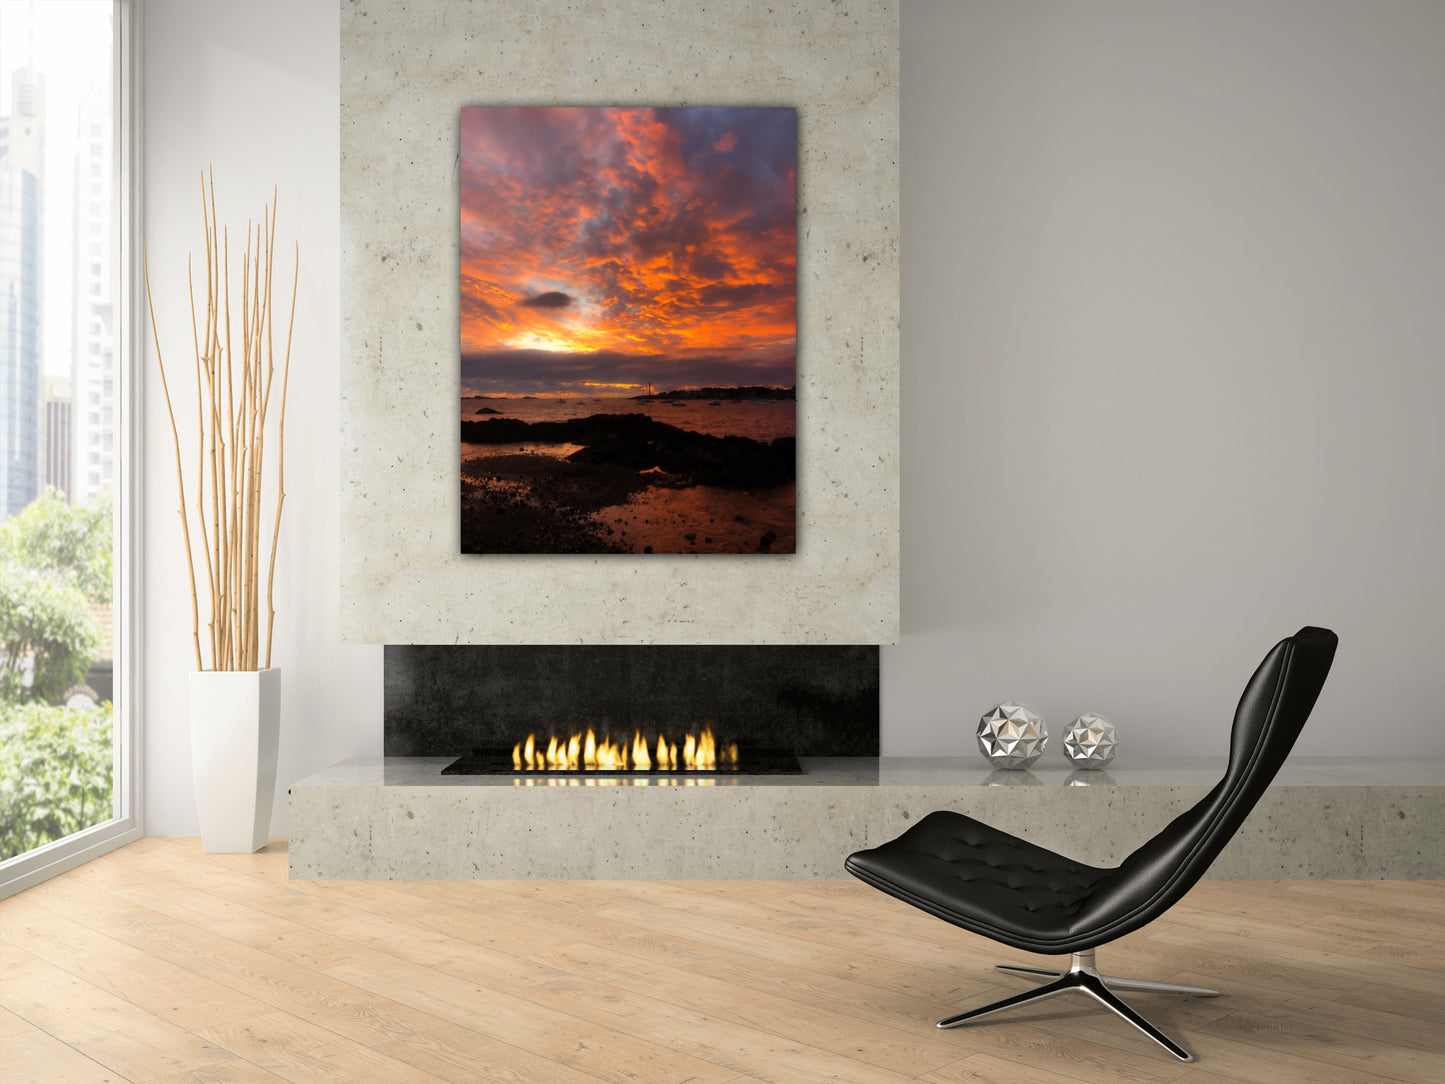 Red Sky Sunrise over Marblehead canvas home decor jacqueline mb designs 